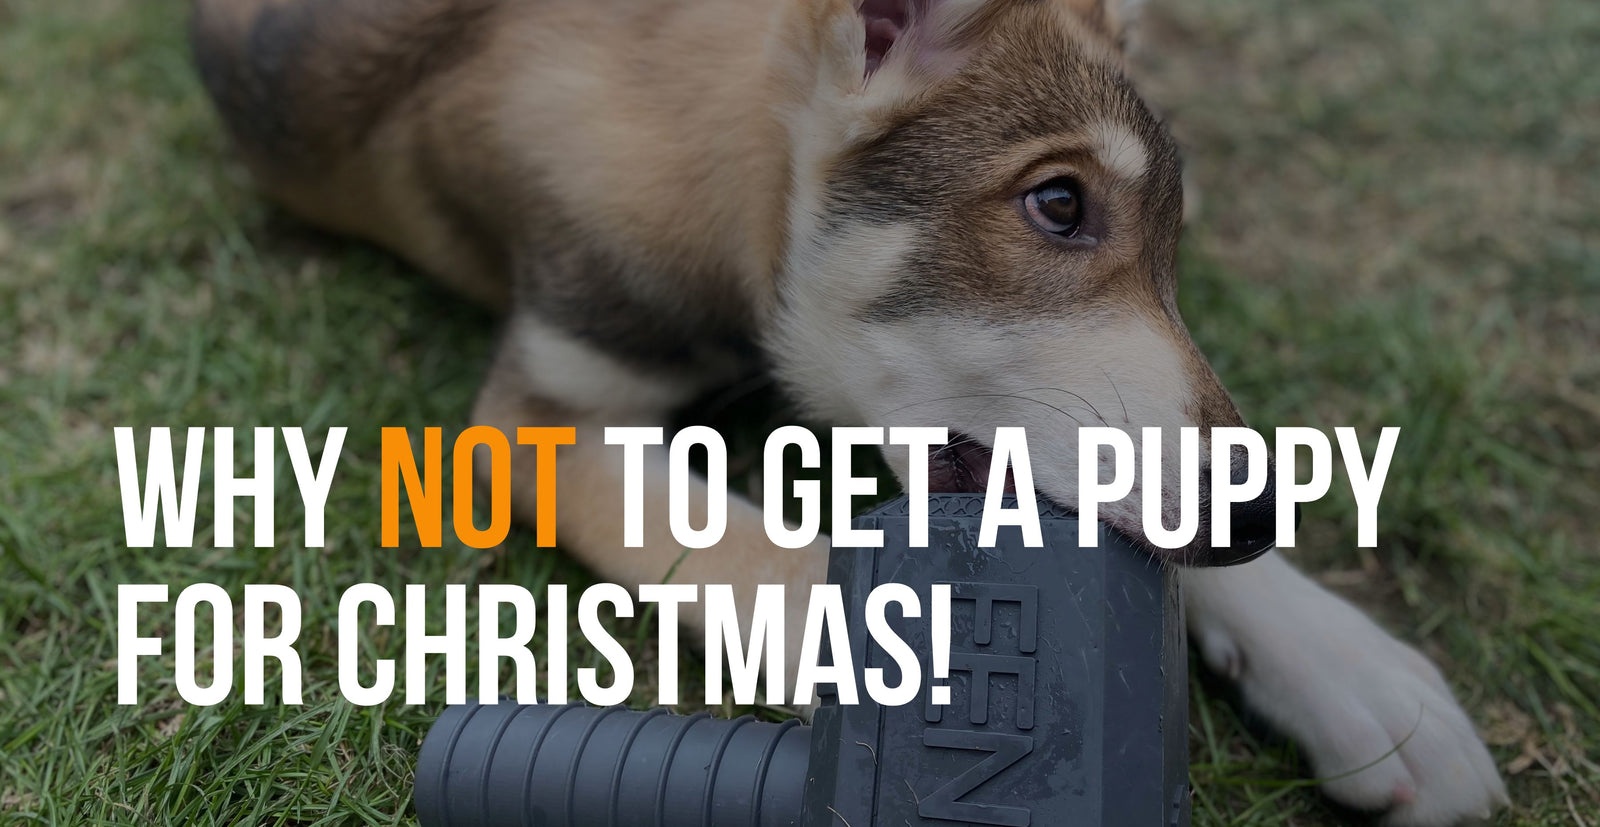 Puppies as Gifts for Christmas: Is it a bad idea? – Fenrir Canine Leaders